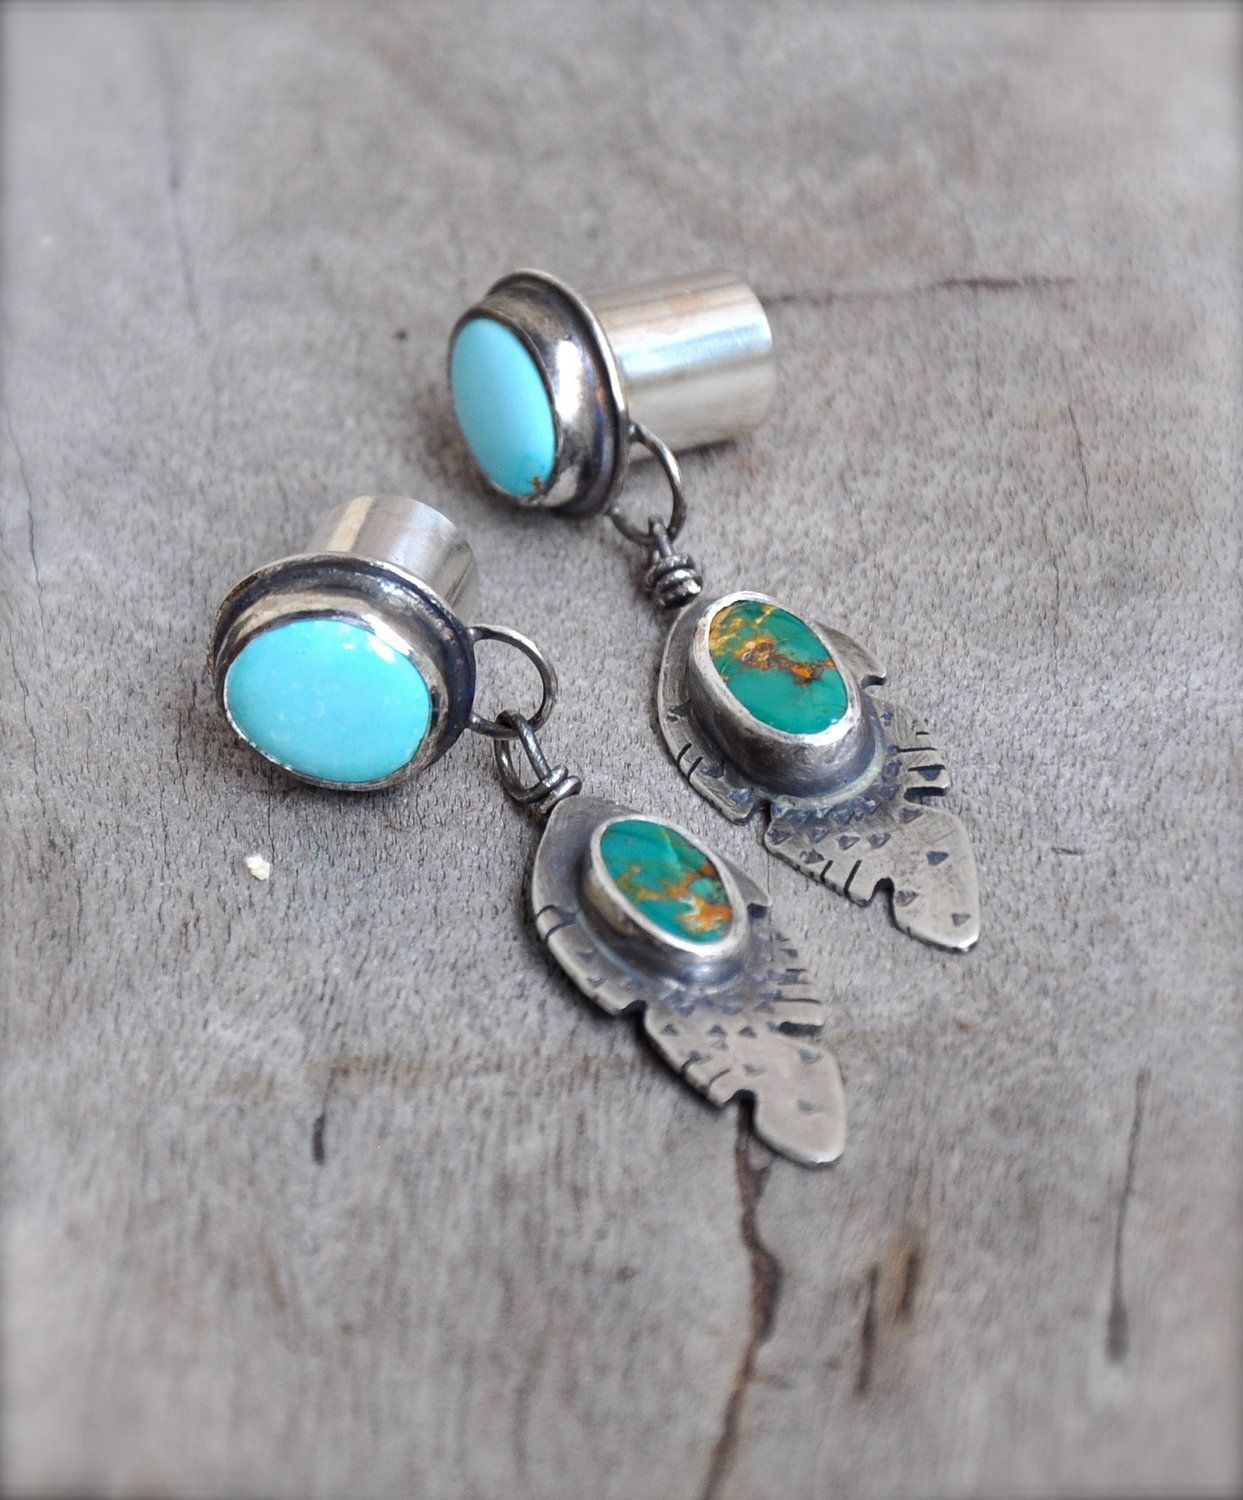 00 gauges | 00 Gauge Turquoise Feather Silver Plugs with Manassa and Sleeping ..